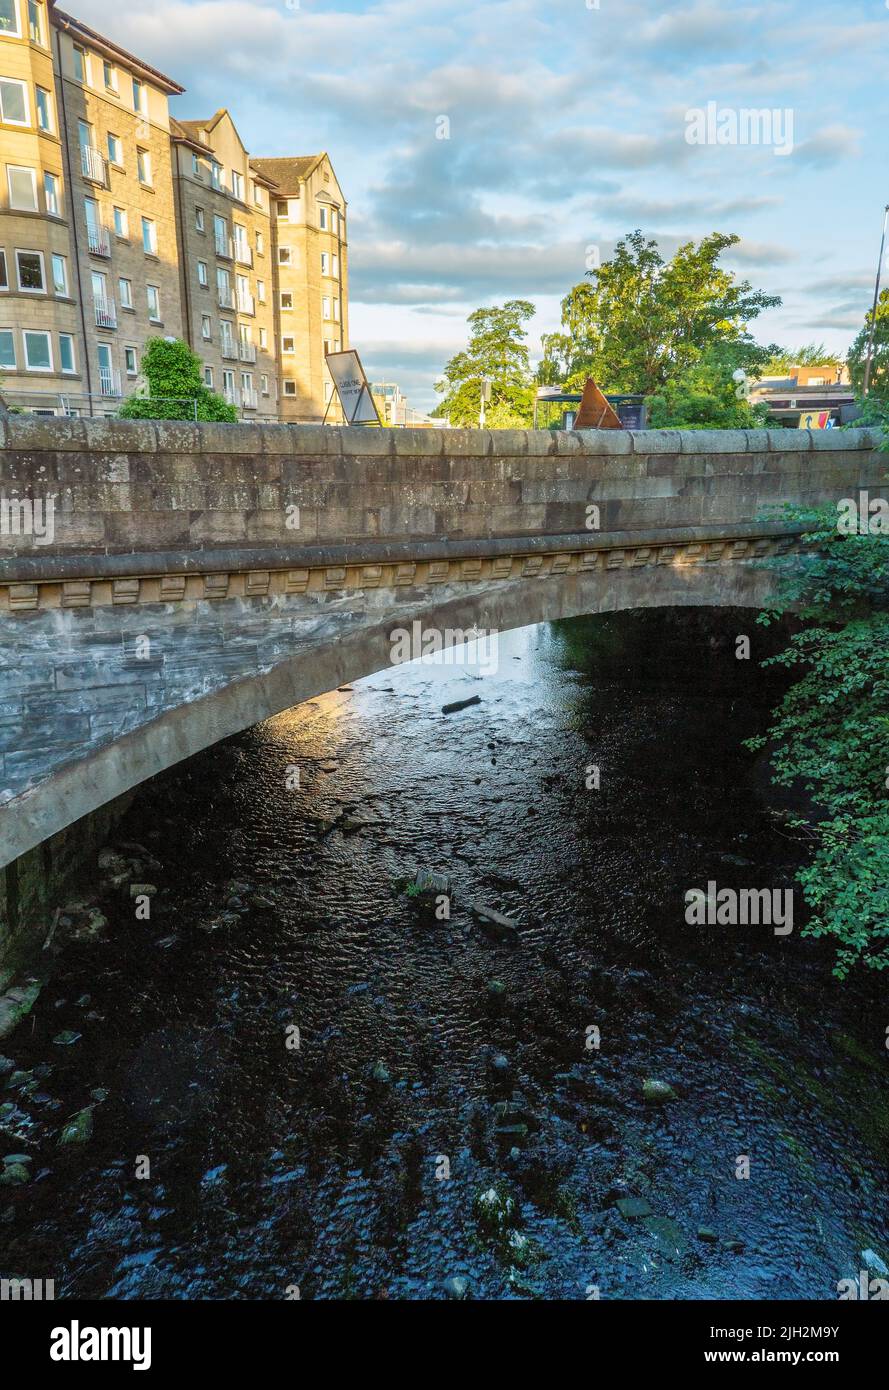 The Water of Leith running through Roseburn which is a suburb of Edinburgh, Scotland Stock Photo